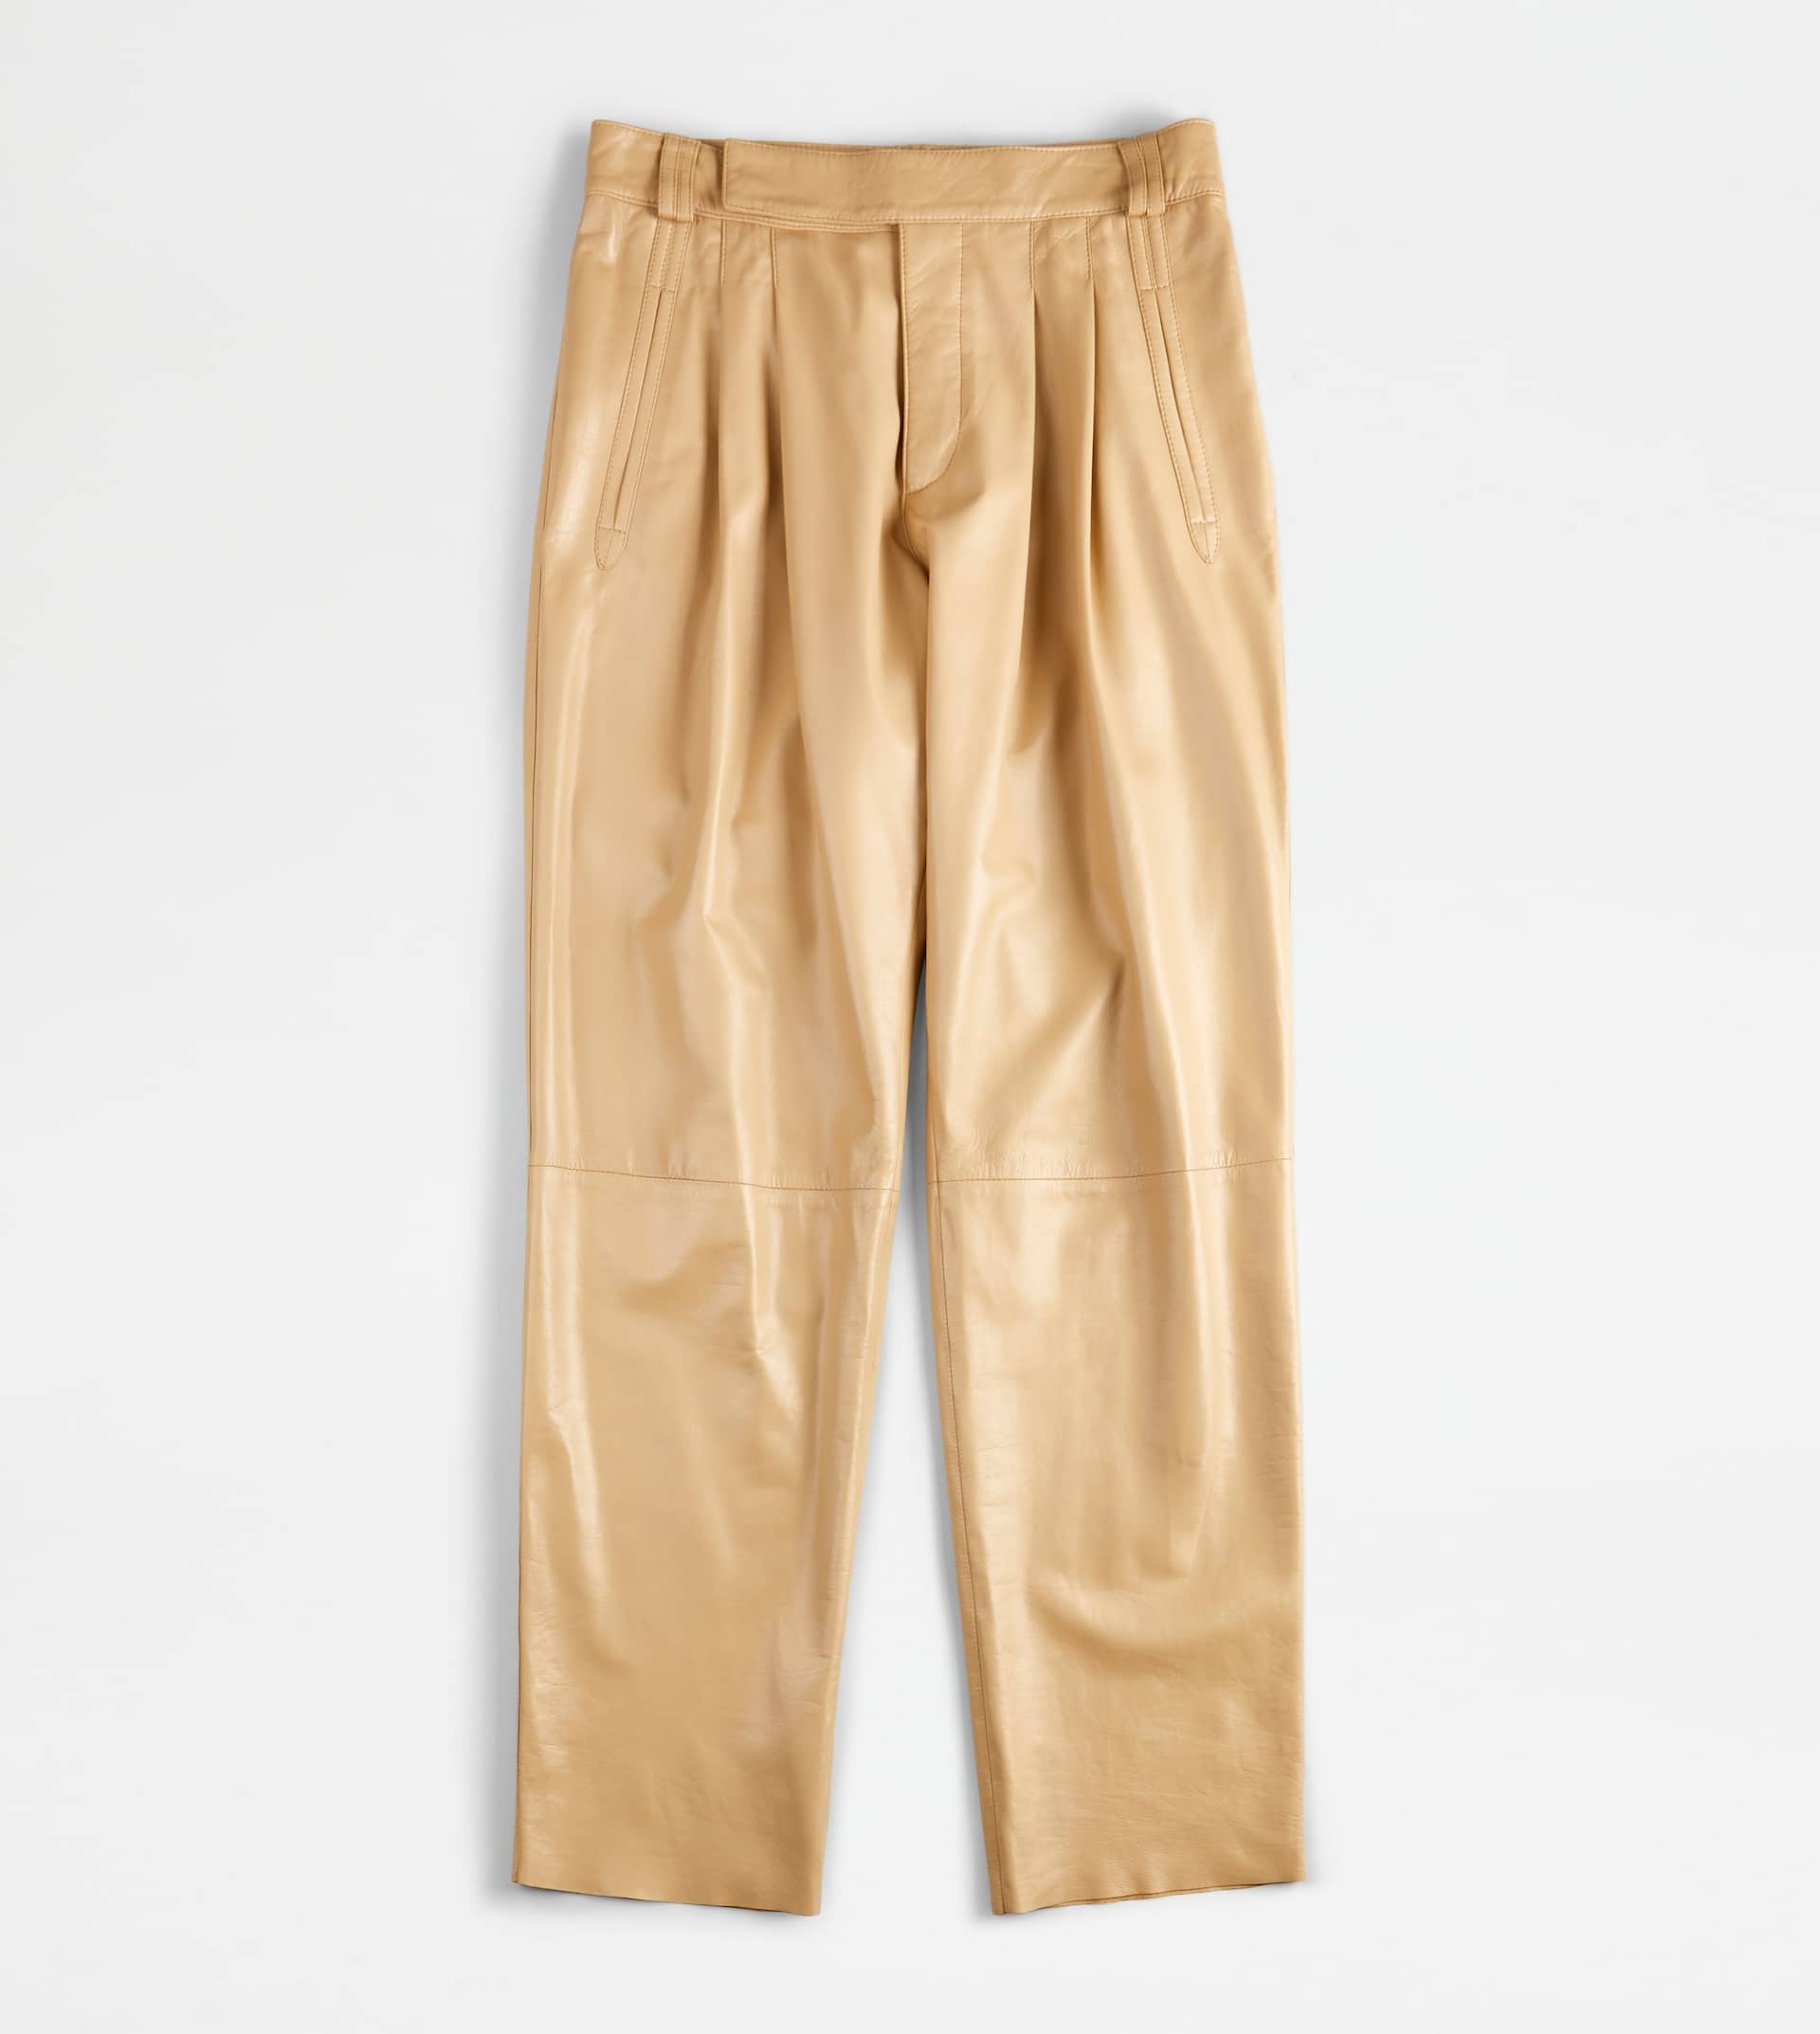 PANTS IN LEATHER - BEIGE - 1